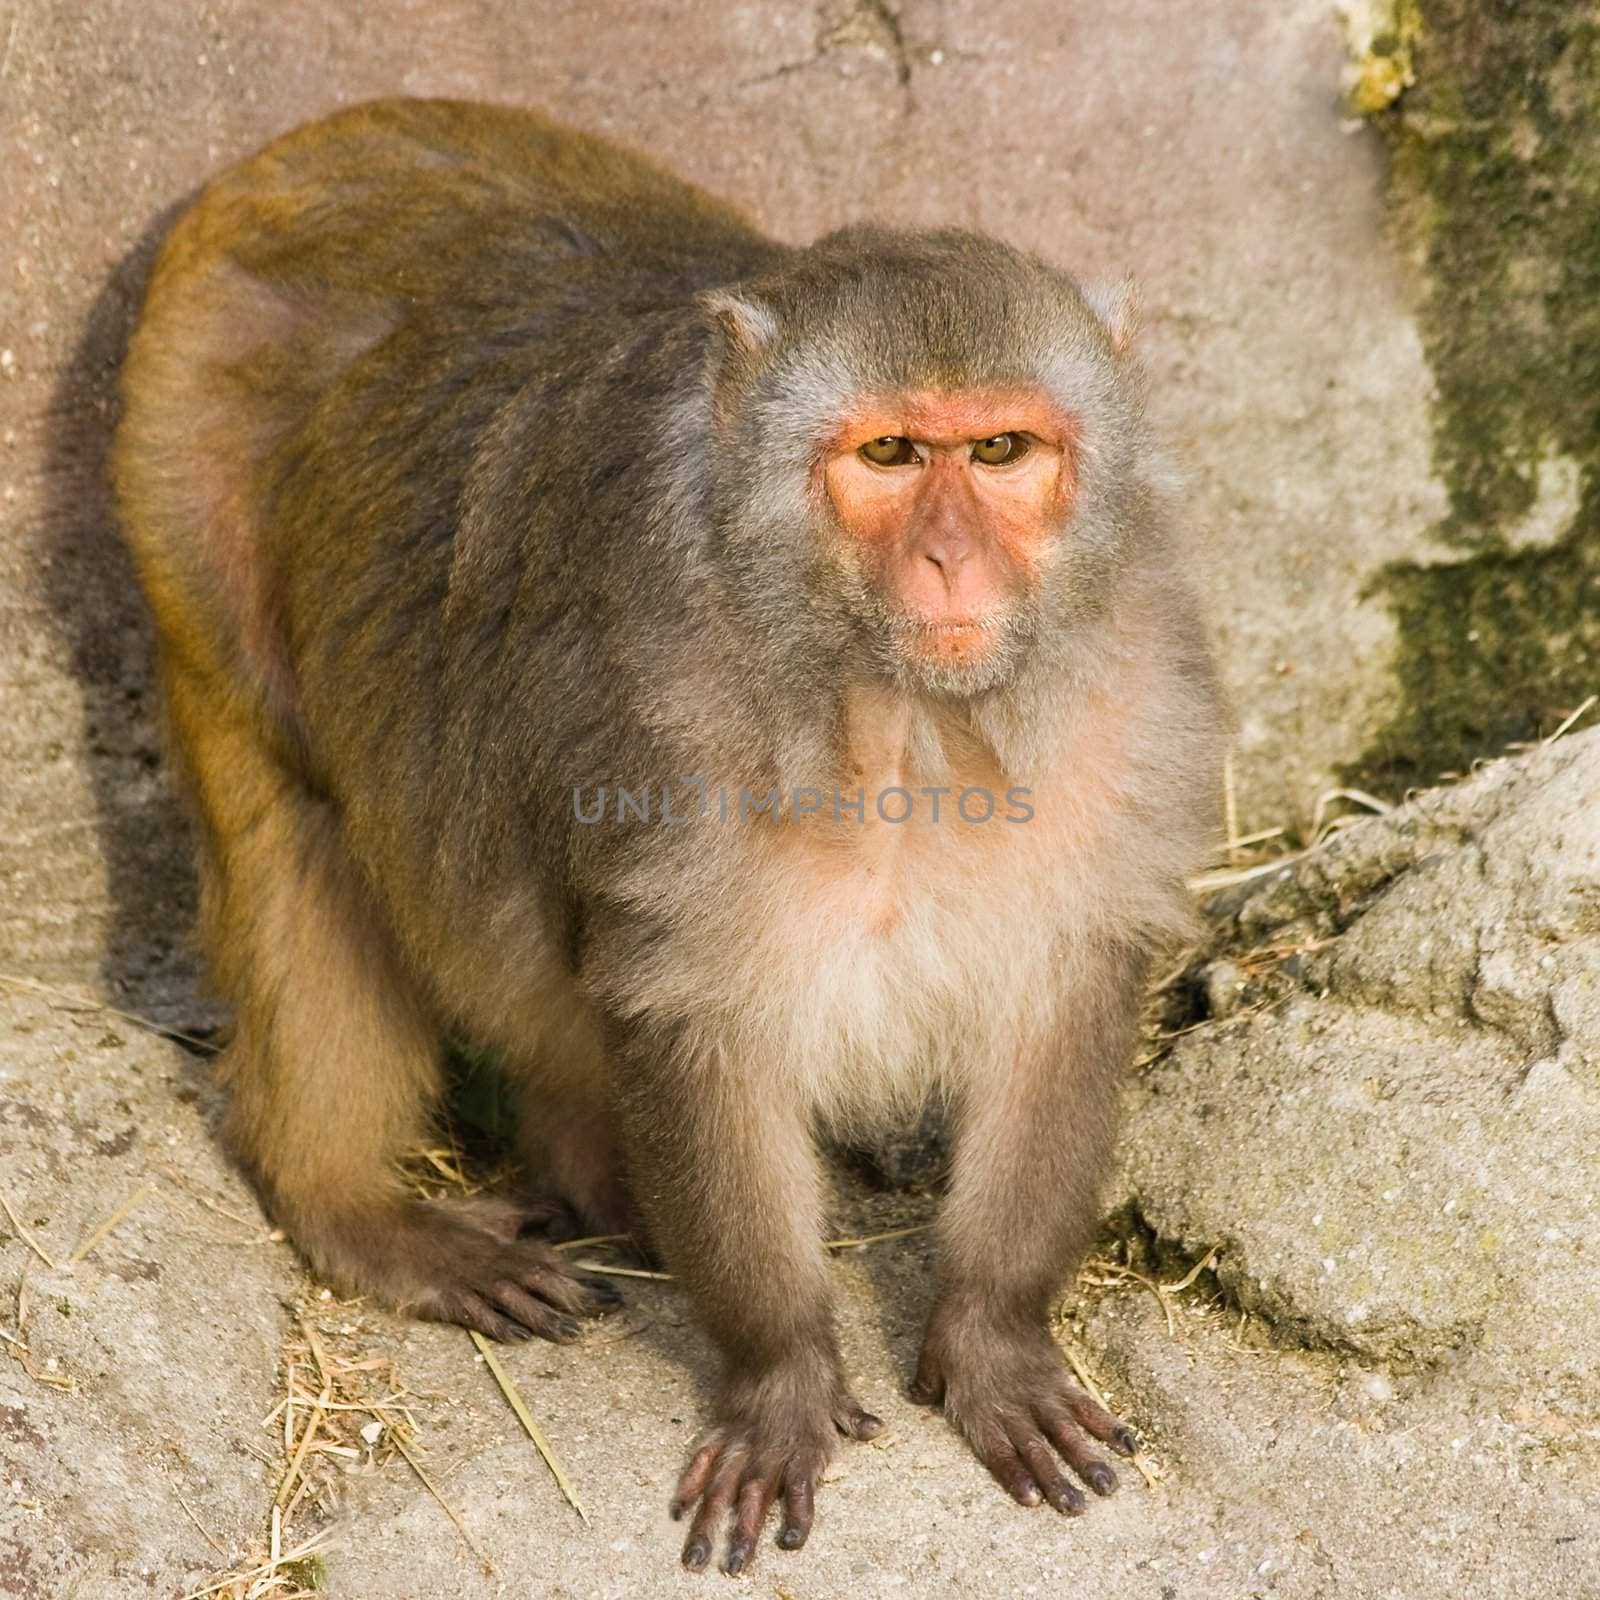 Rhesus monkey - square image by Colette